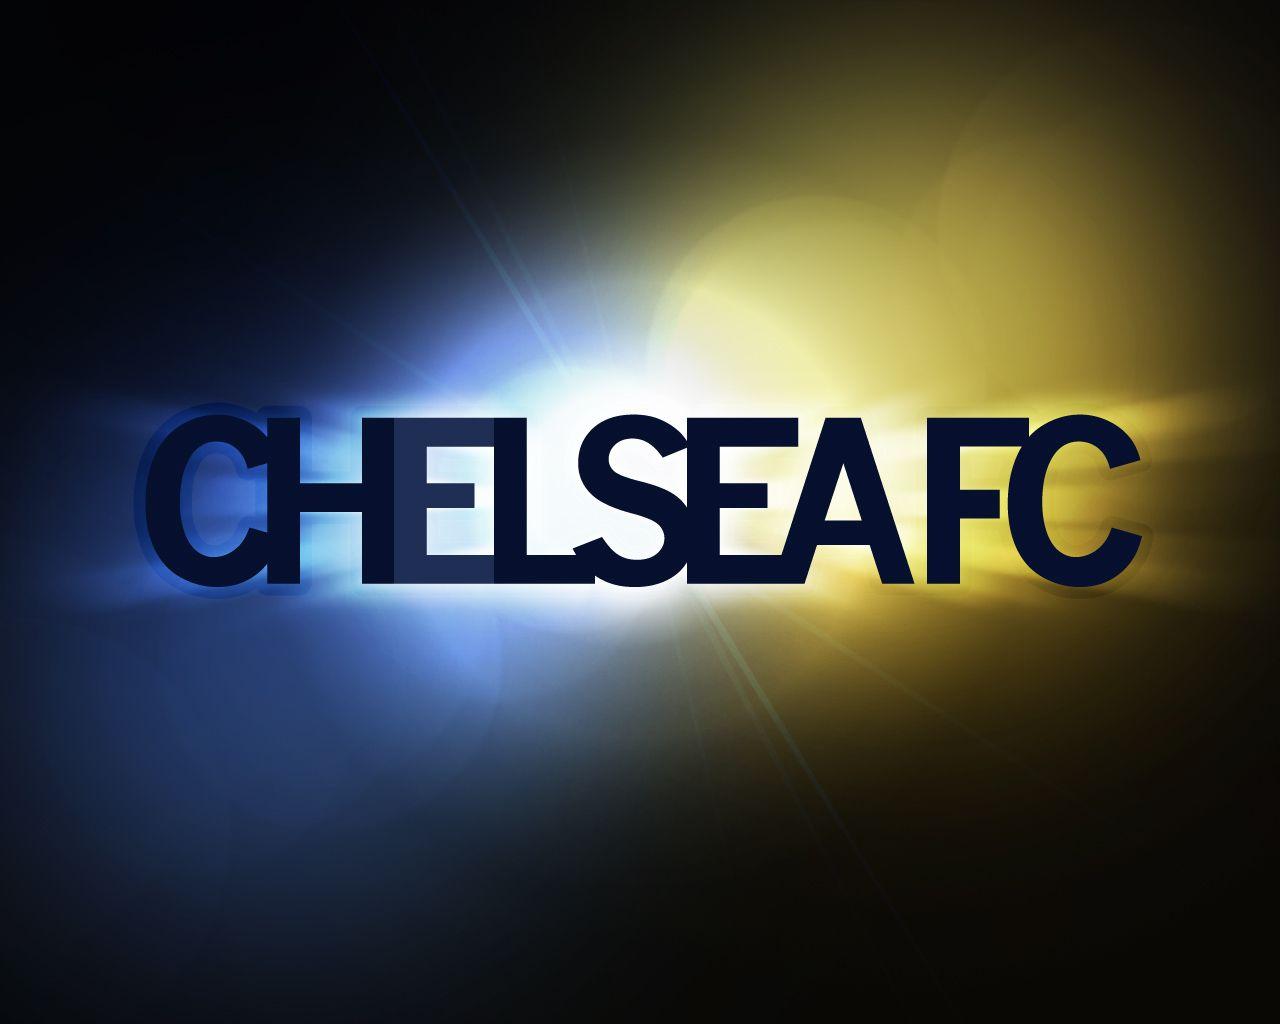 Chelsea Football Club for download